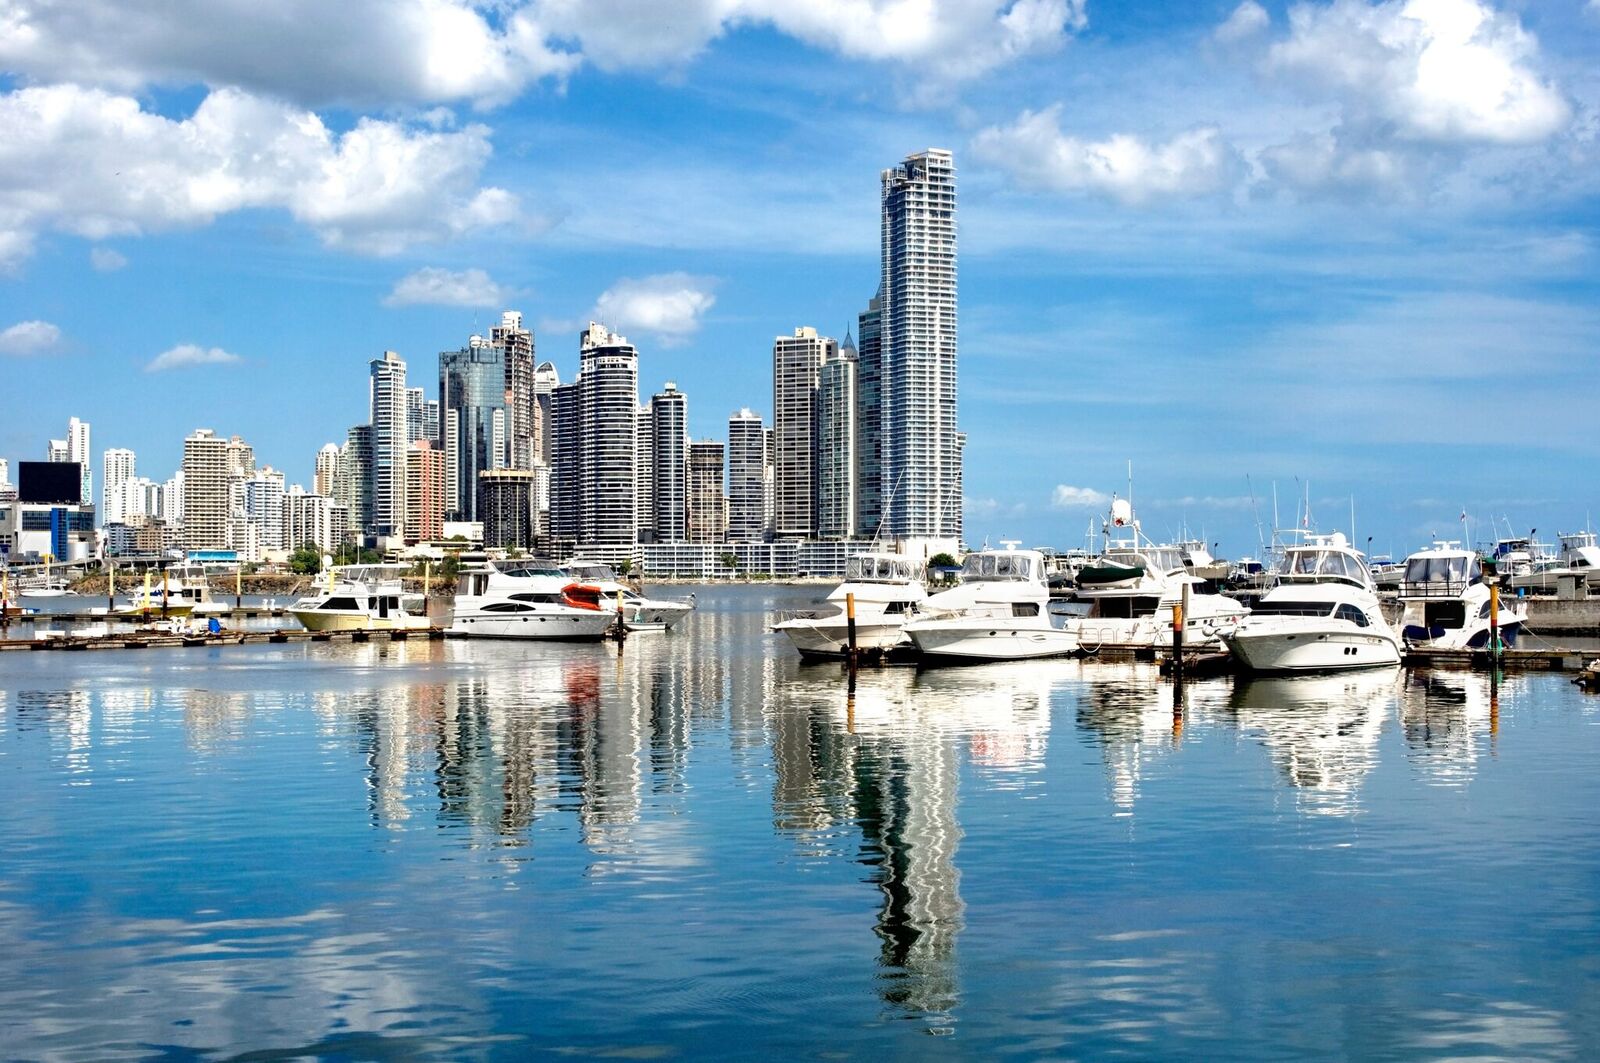 Should I Buy a Car While Visiting Panama and Resell It?